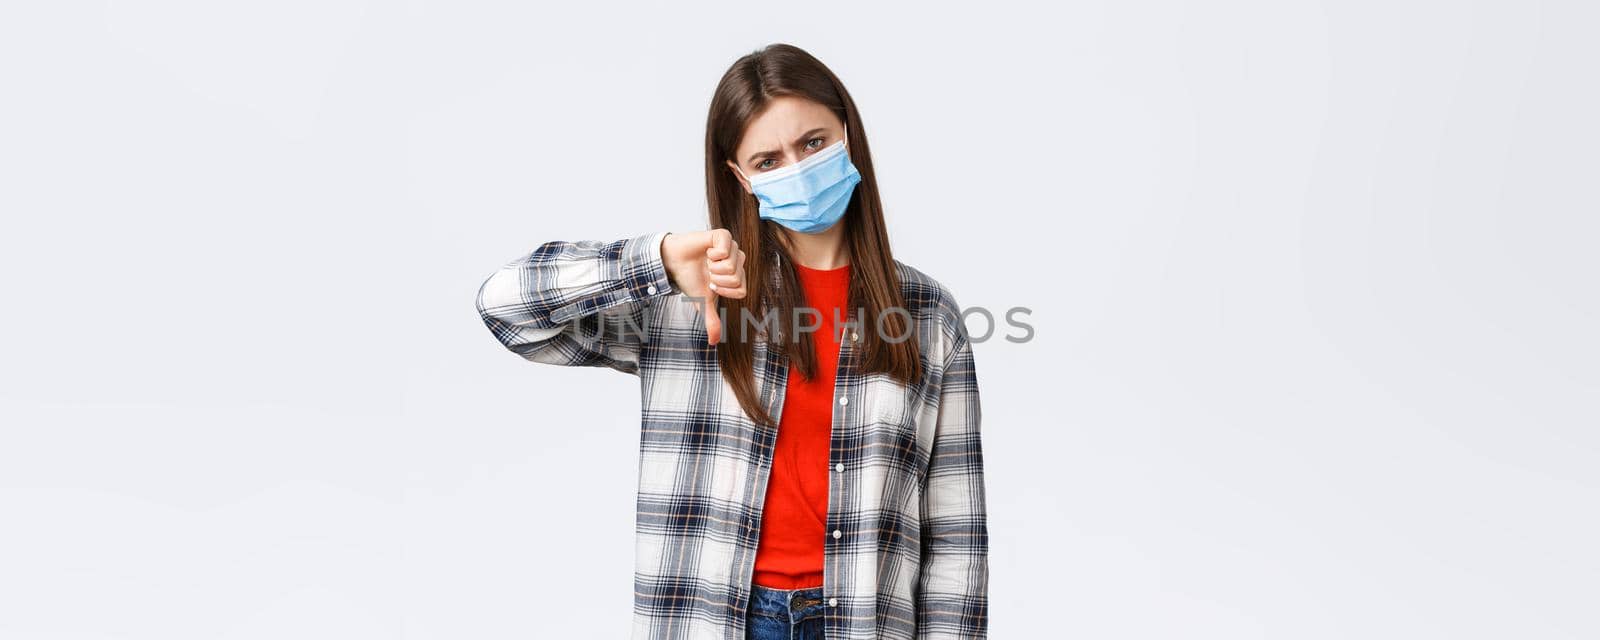 Coronavirus outbreak, leisure on quarantine, social distancing and emotions concept. Lame bad idea. Displeased and unamused young woman in medical mask thumb-down in disapproval.